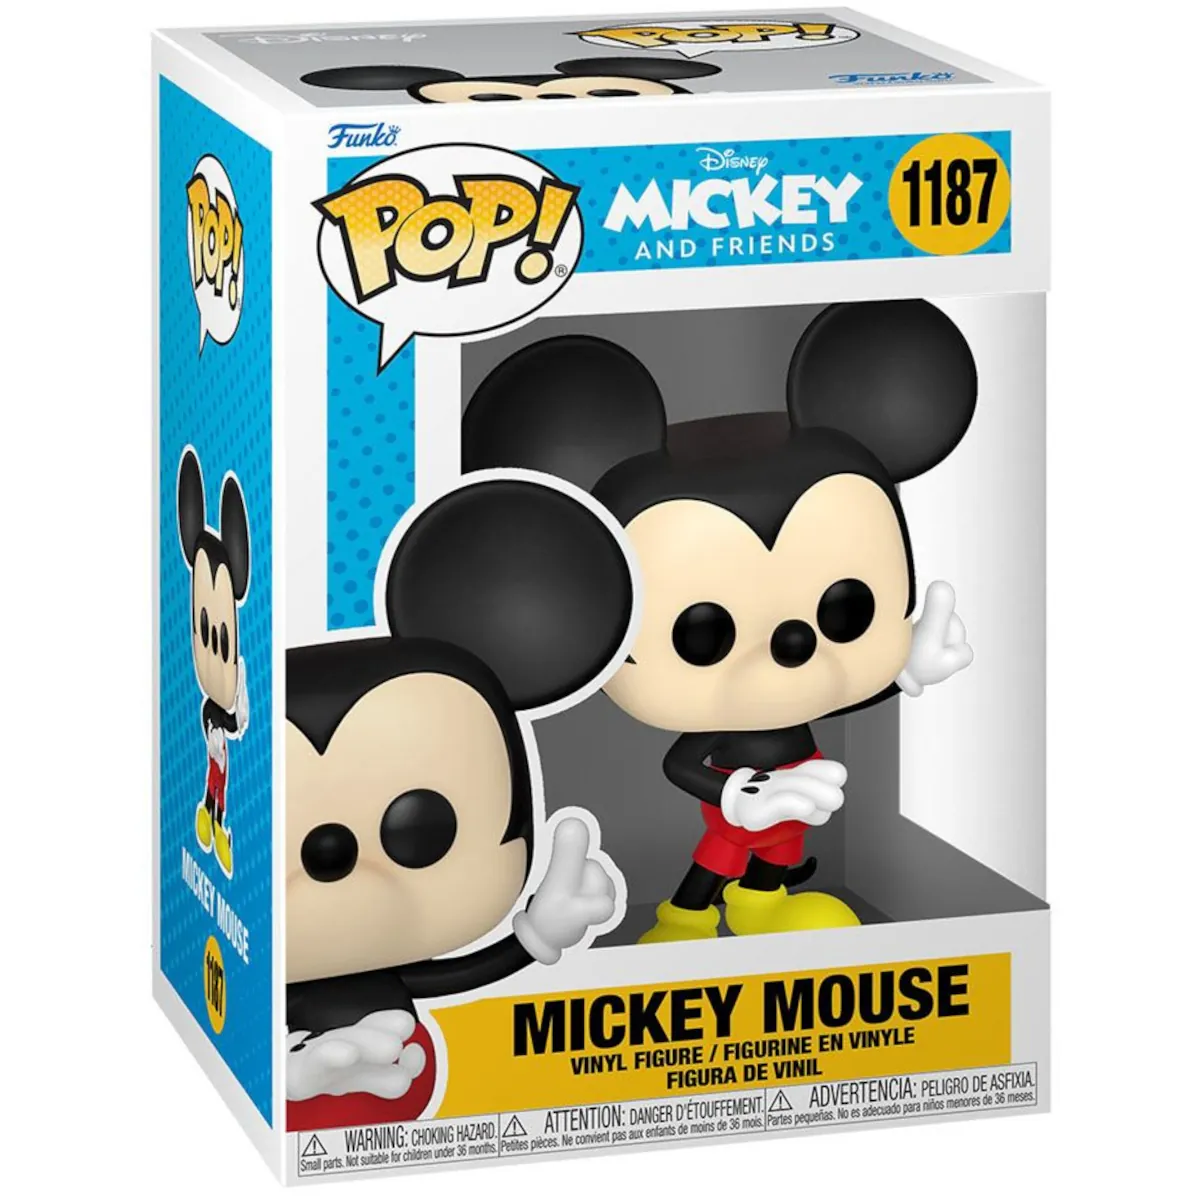 FK59623 Funko Pop! Disney - Mickey and Friends - Mickey Mouse Collectable Vinyl Figure Box